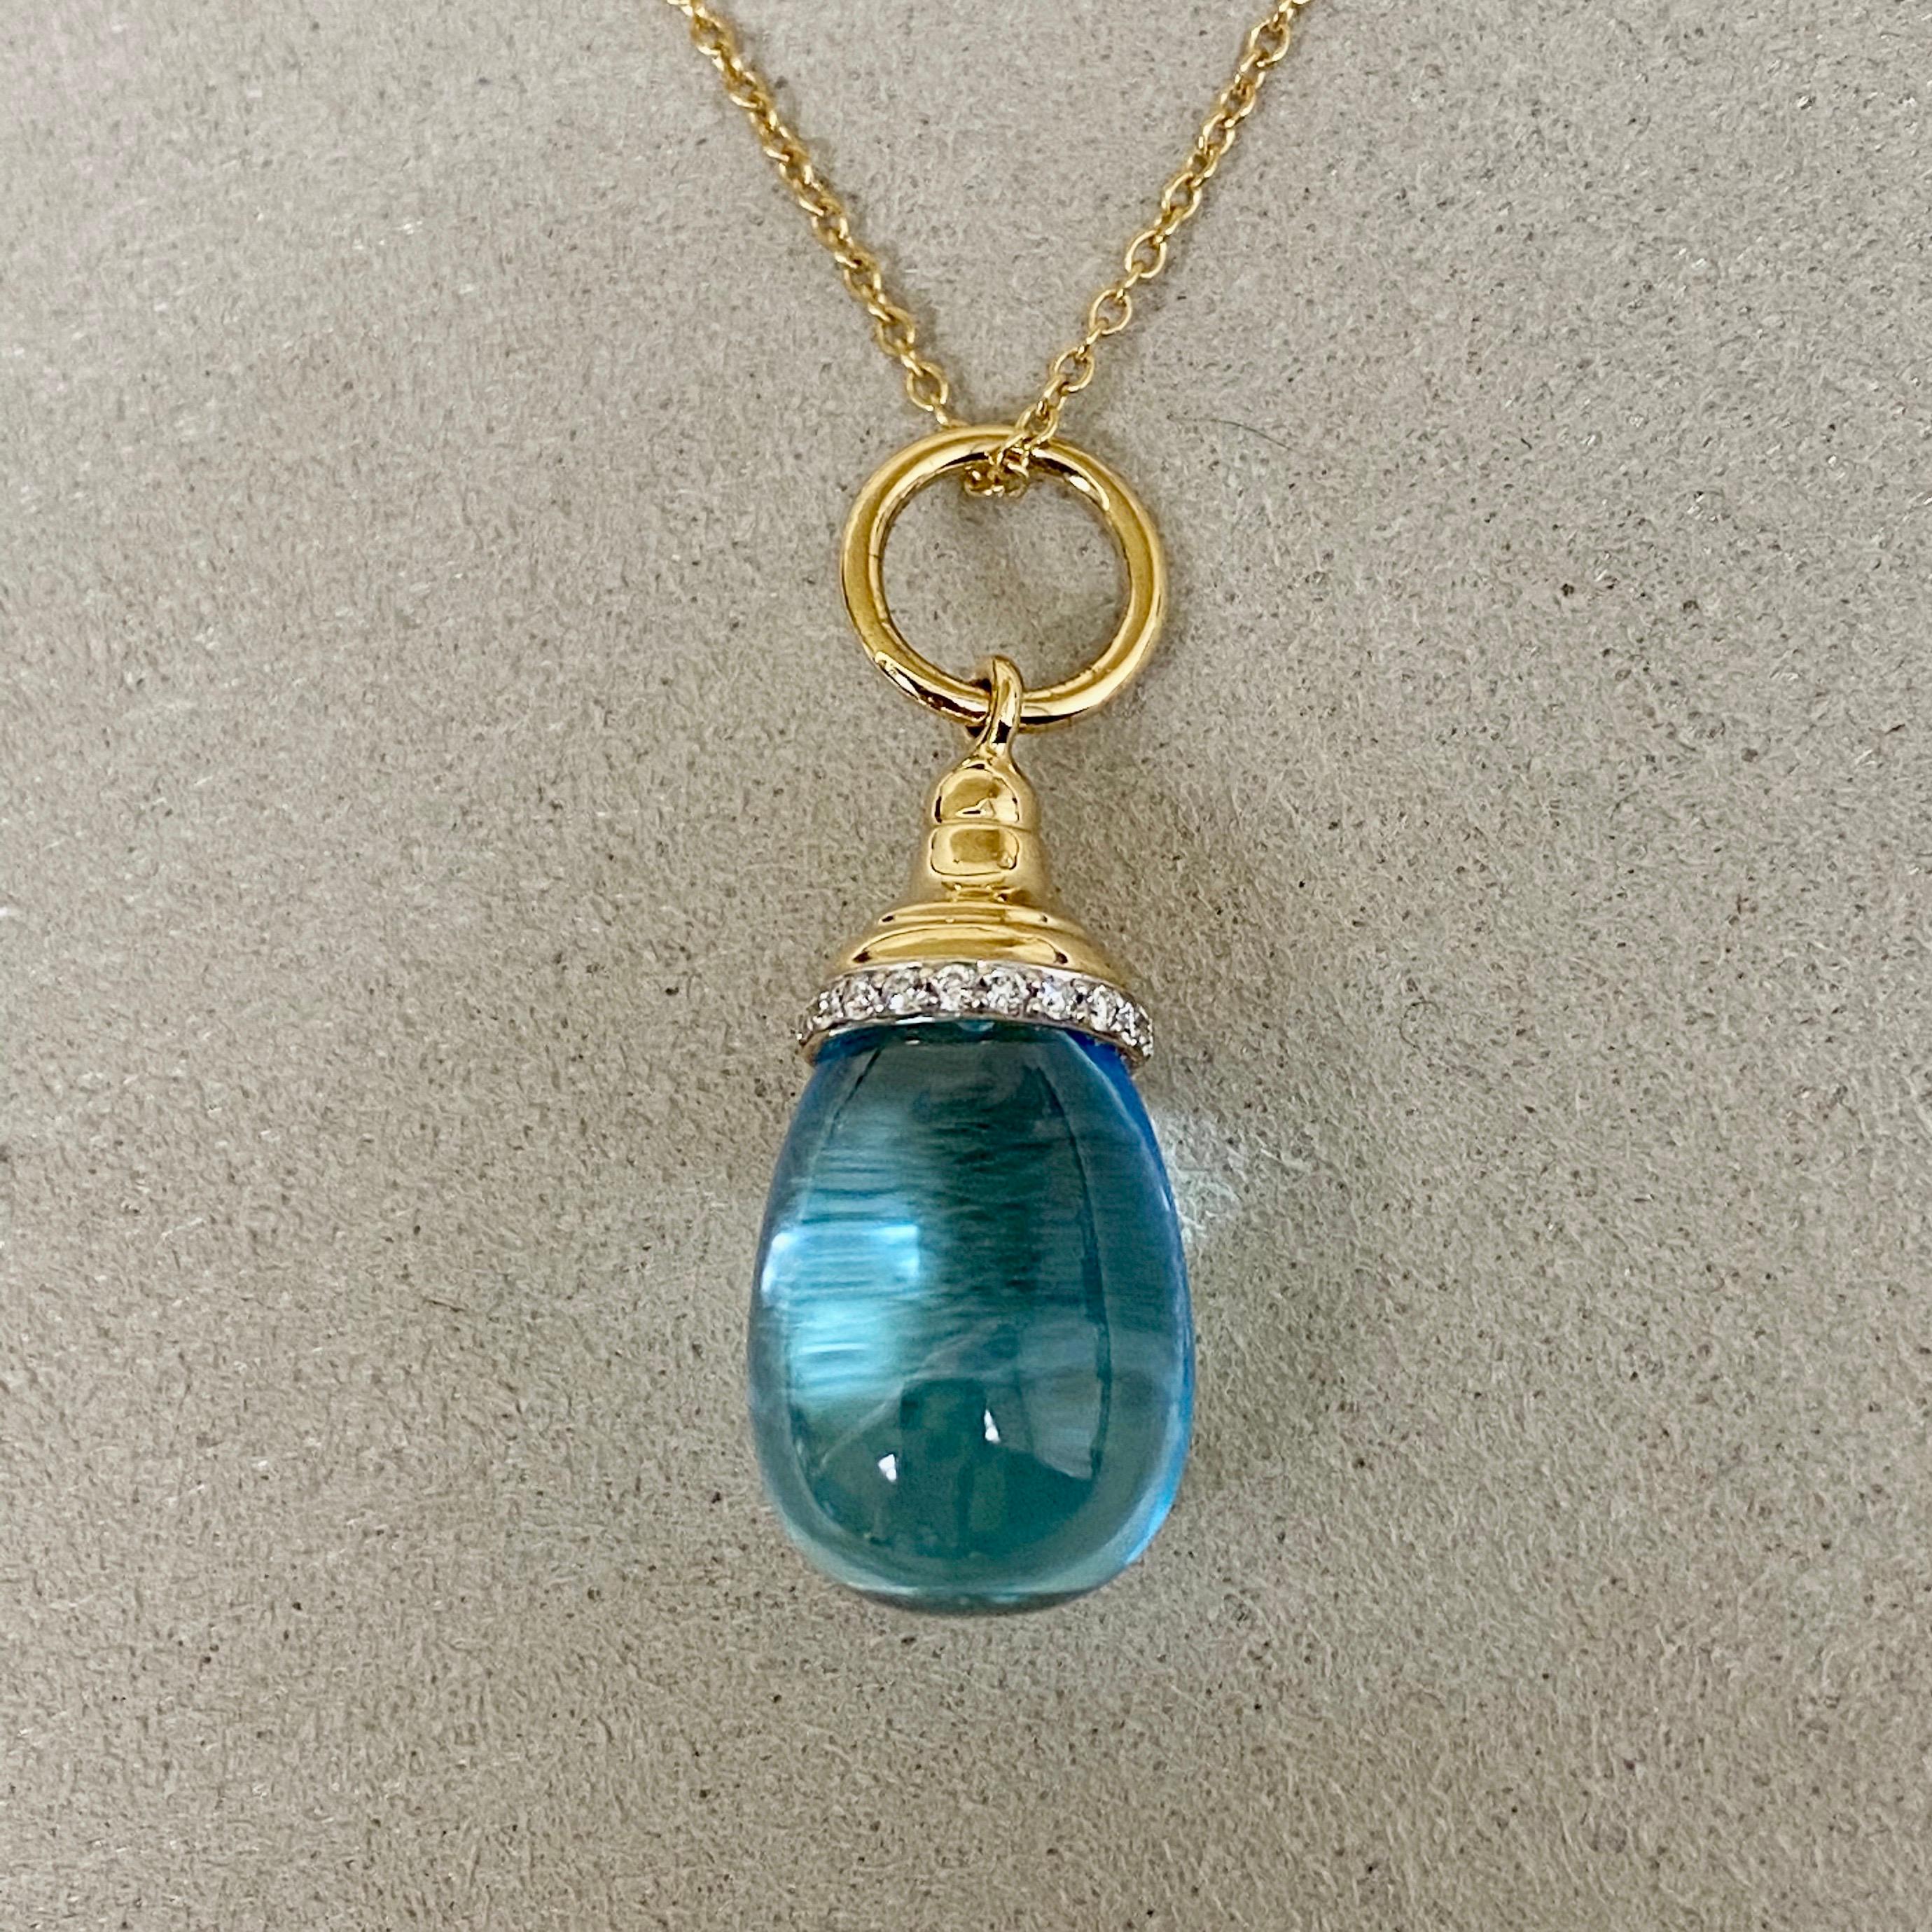 Created in 18 karat yellow gold 
Blue Topaz 15 cts approx
Diamond 0.10 ct approx
18 kyg 18 inch chain with lobster lock
Chain can be worn at 17th inch

Handcrafted in 18K yellow gold, this necklace features a dazzling 15-carat blue topaz gemstone